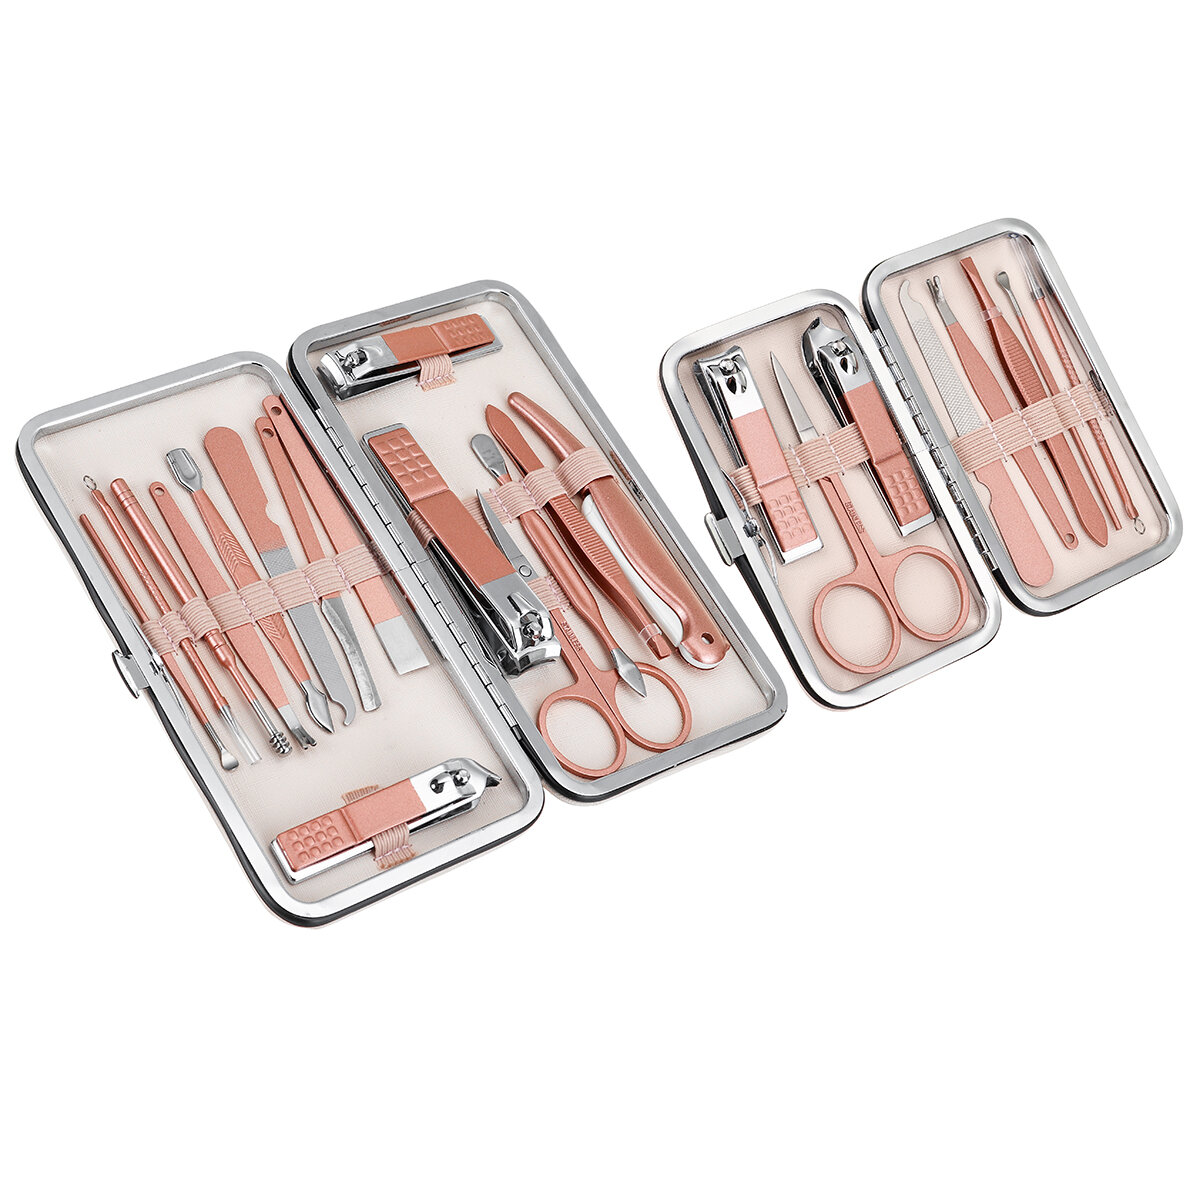 

8 Pcs/ 15 Pcs Stainless Steel Nail Clippers Manicure Pedicure Set